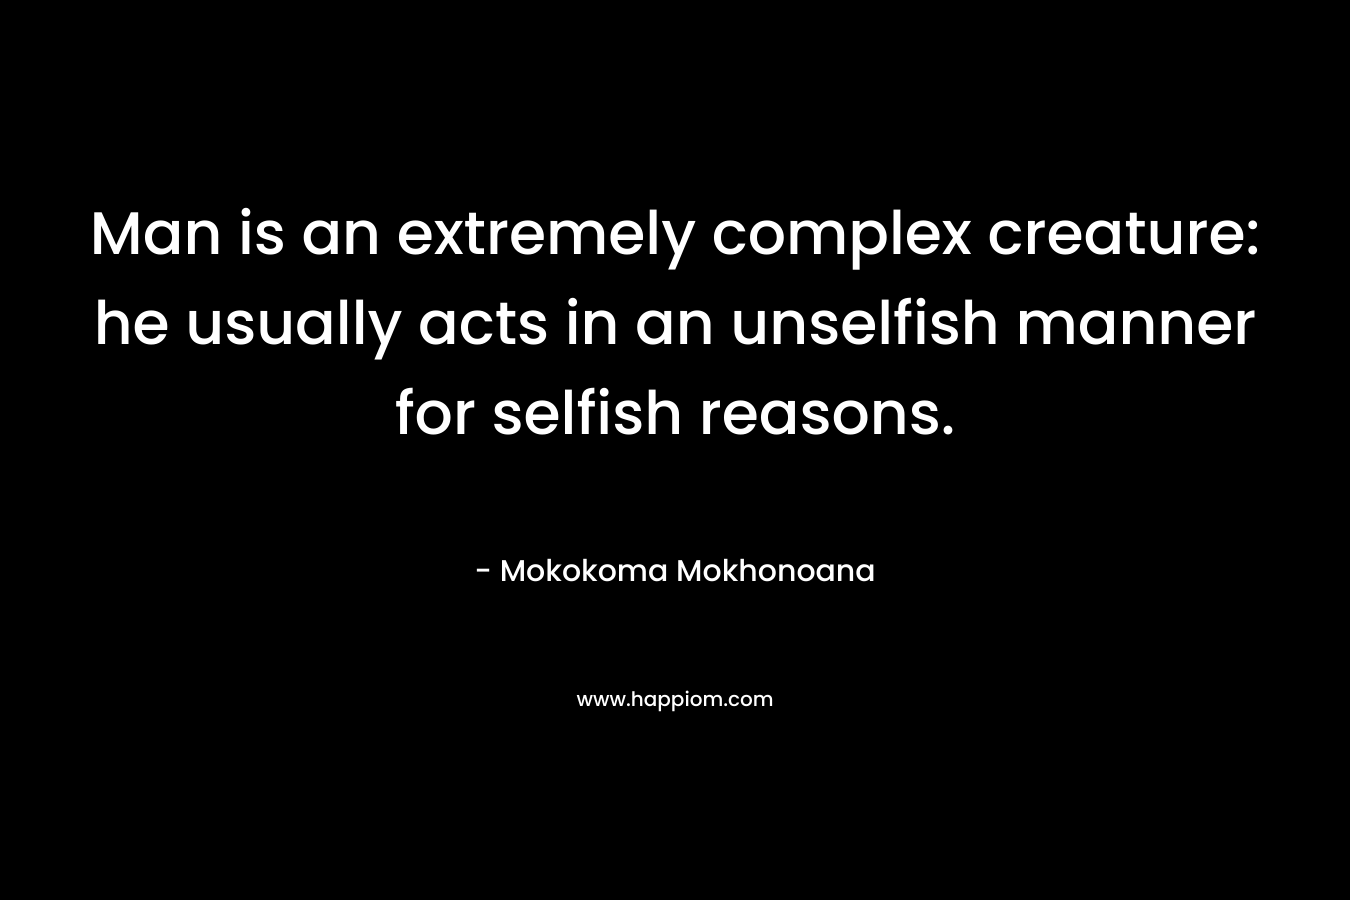 Man is an extremely complex creature: he usually acts in an unselfish manner for selfish reasons.